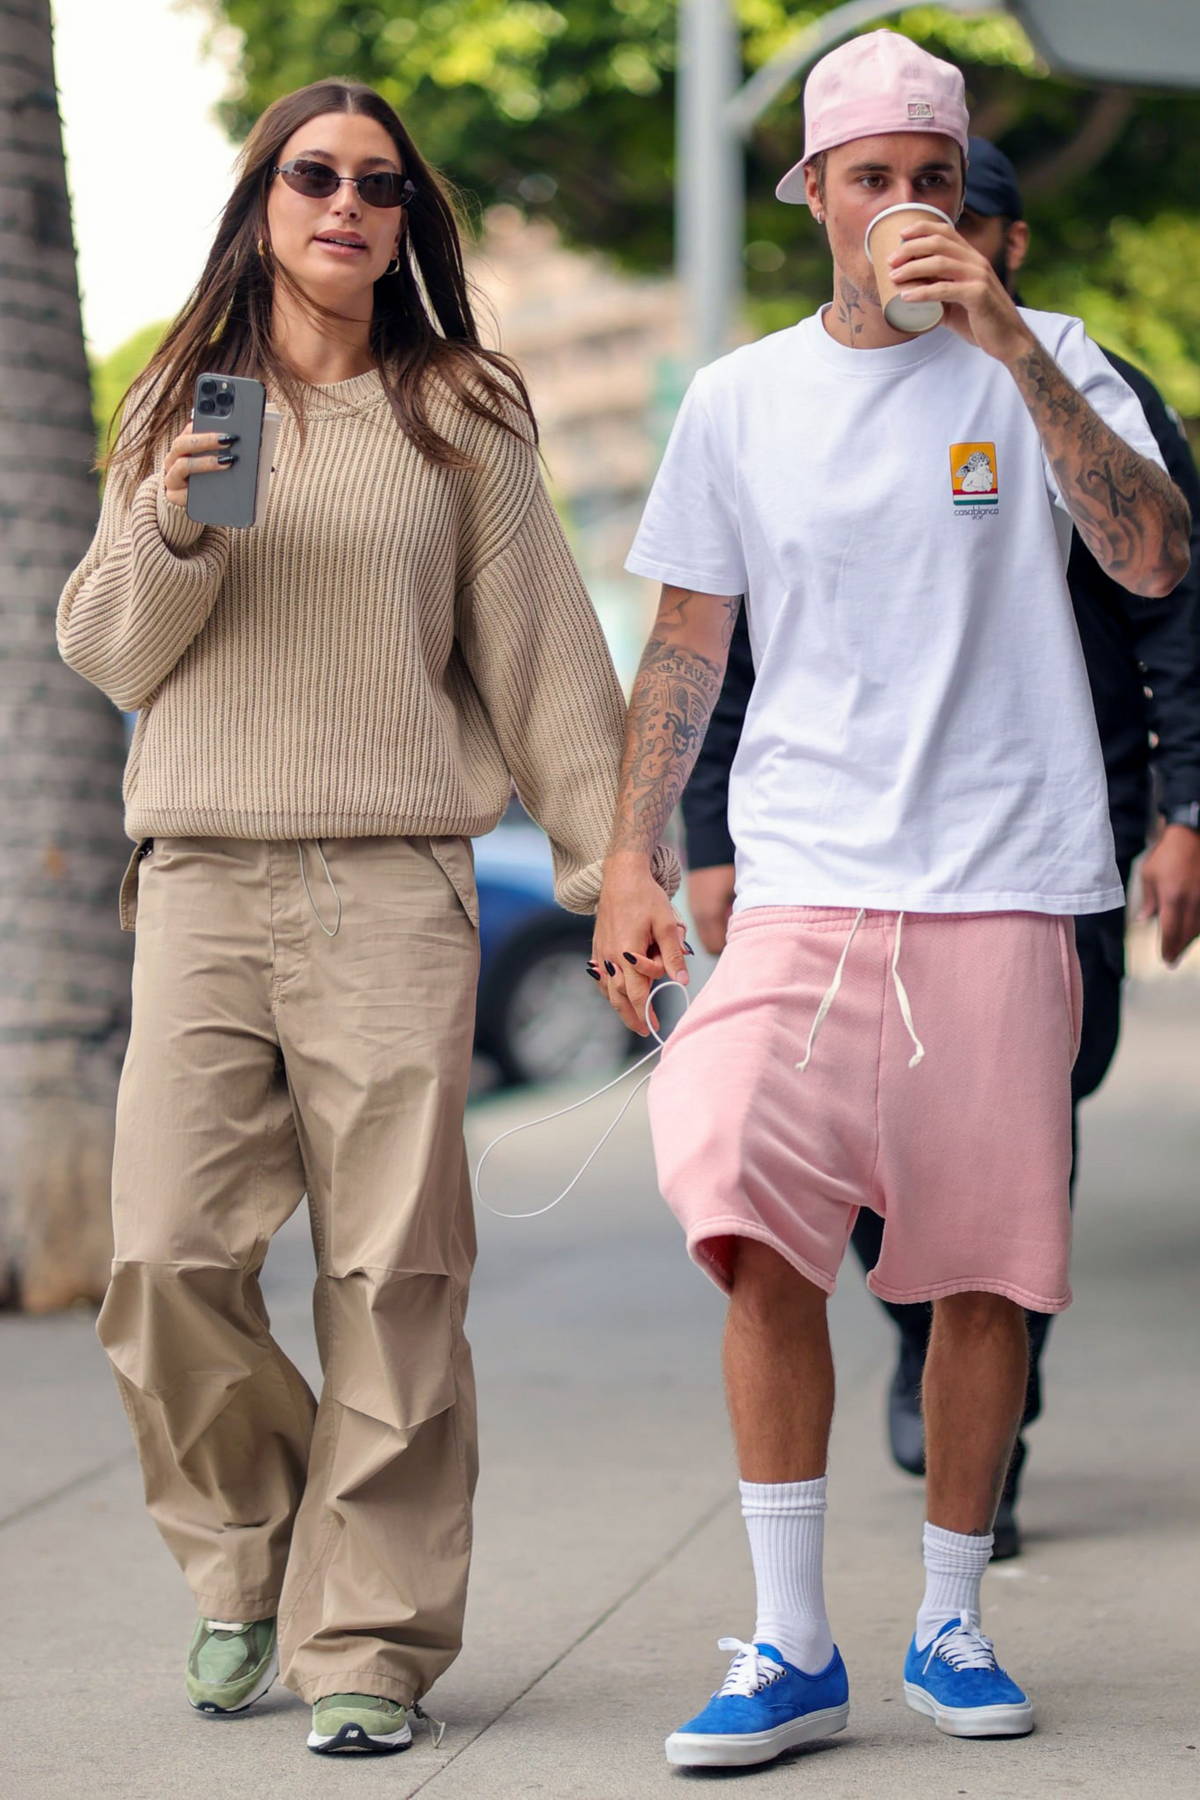 Hailey and Justin Bieber Pull Out Their Baggiest Denim Pants For a Date